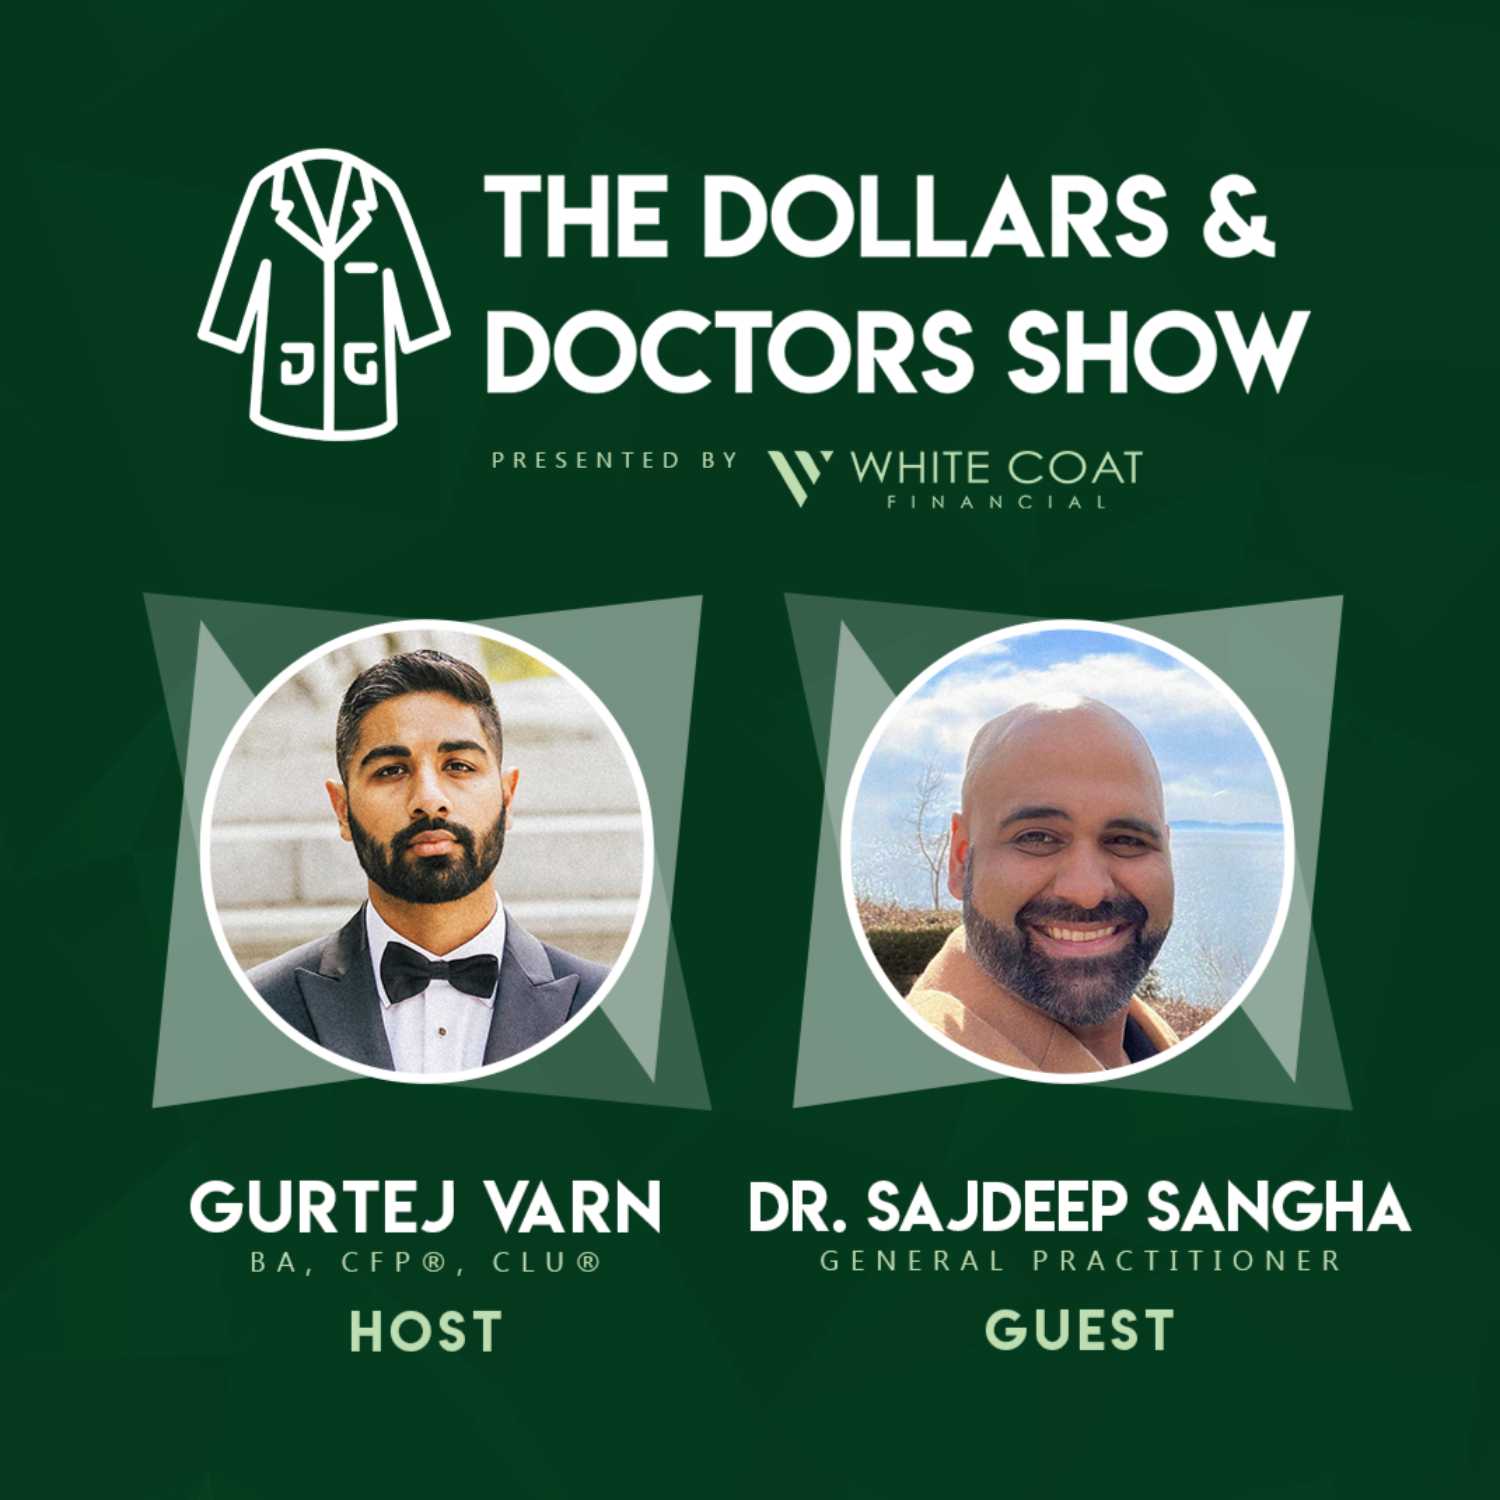 Episode 10: Dr. Rajdeep Sangha - Overcoming Failure & Striving for Excellence